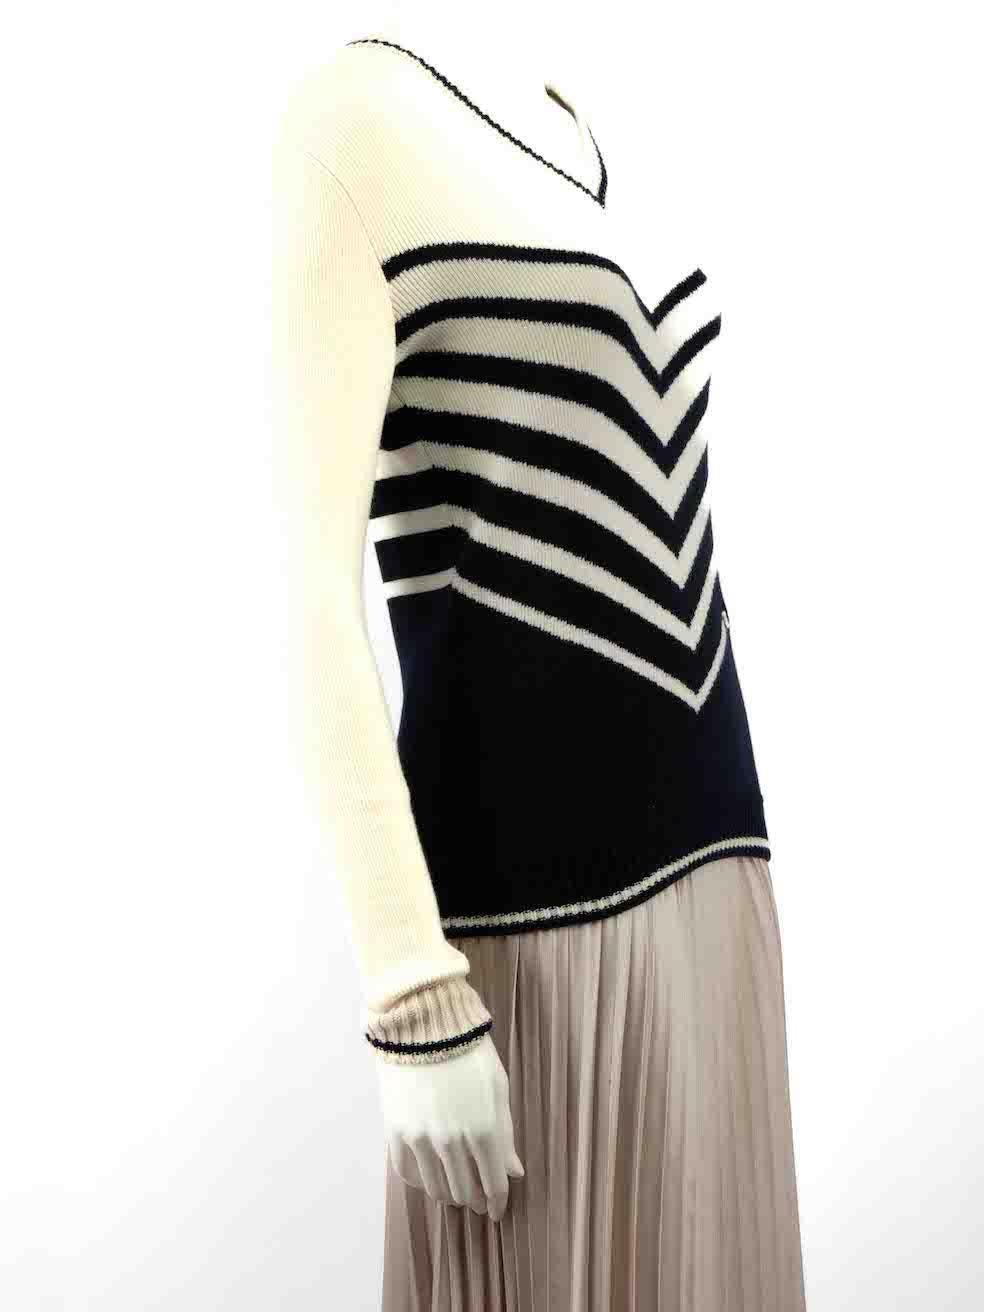 CONDITION is Very good. Hardly any visible wear to jumper is evident on this used Valentino designer resale item.
 
 Details
 Multicolour
 Wool
 Knit jumper
 V-neck
 Long sleeves
 Striped pattern
 
 
 Made in Italy
 
 Composition
 70% Wool, 30%